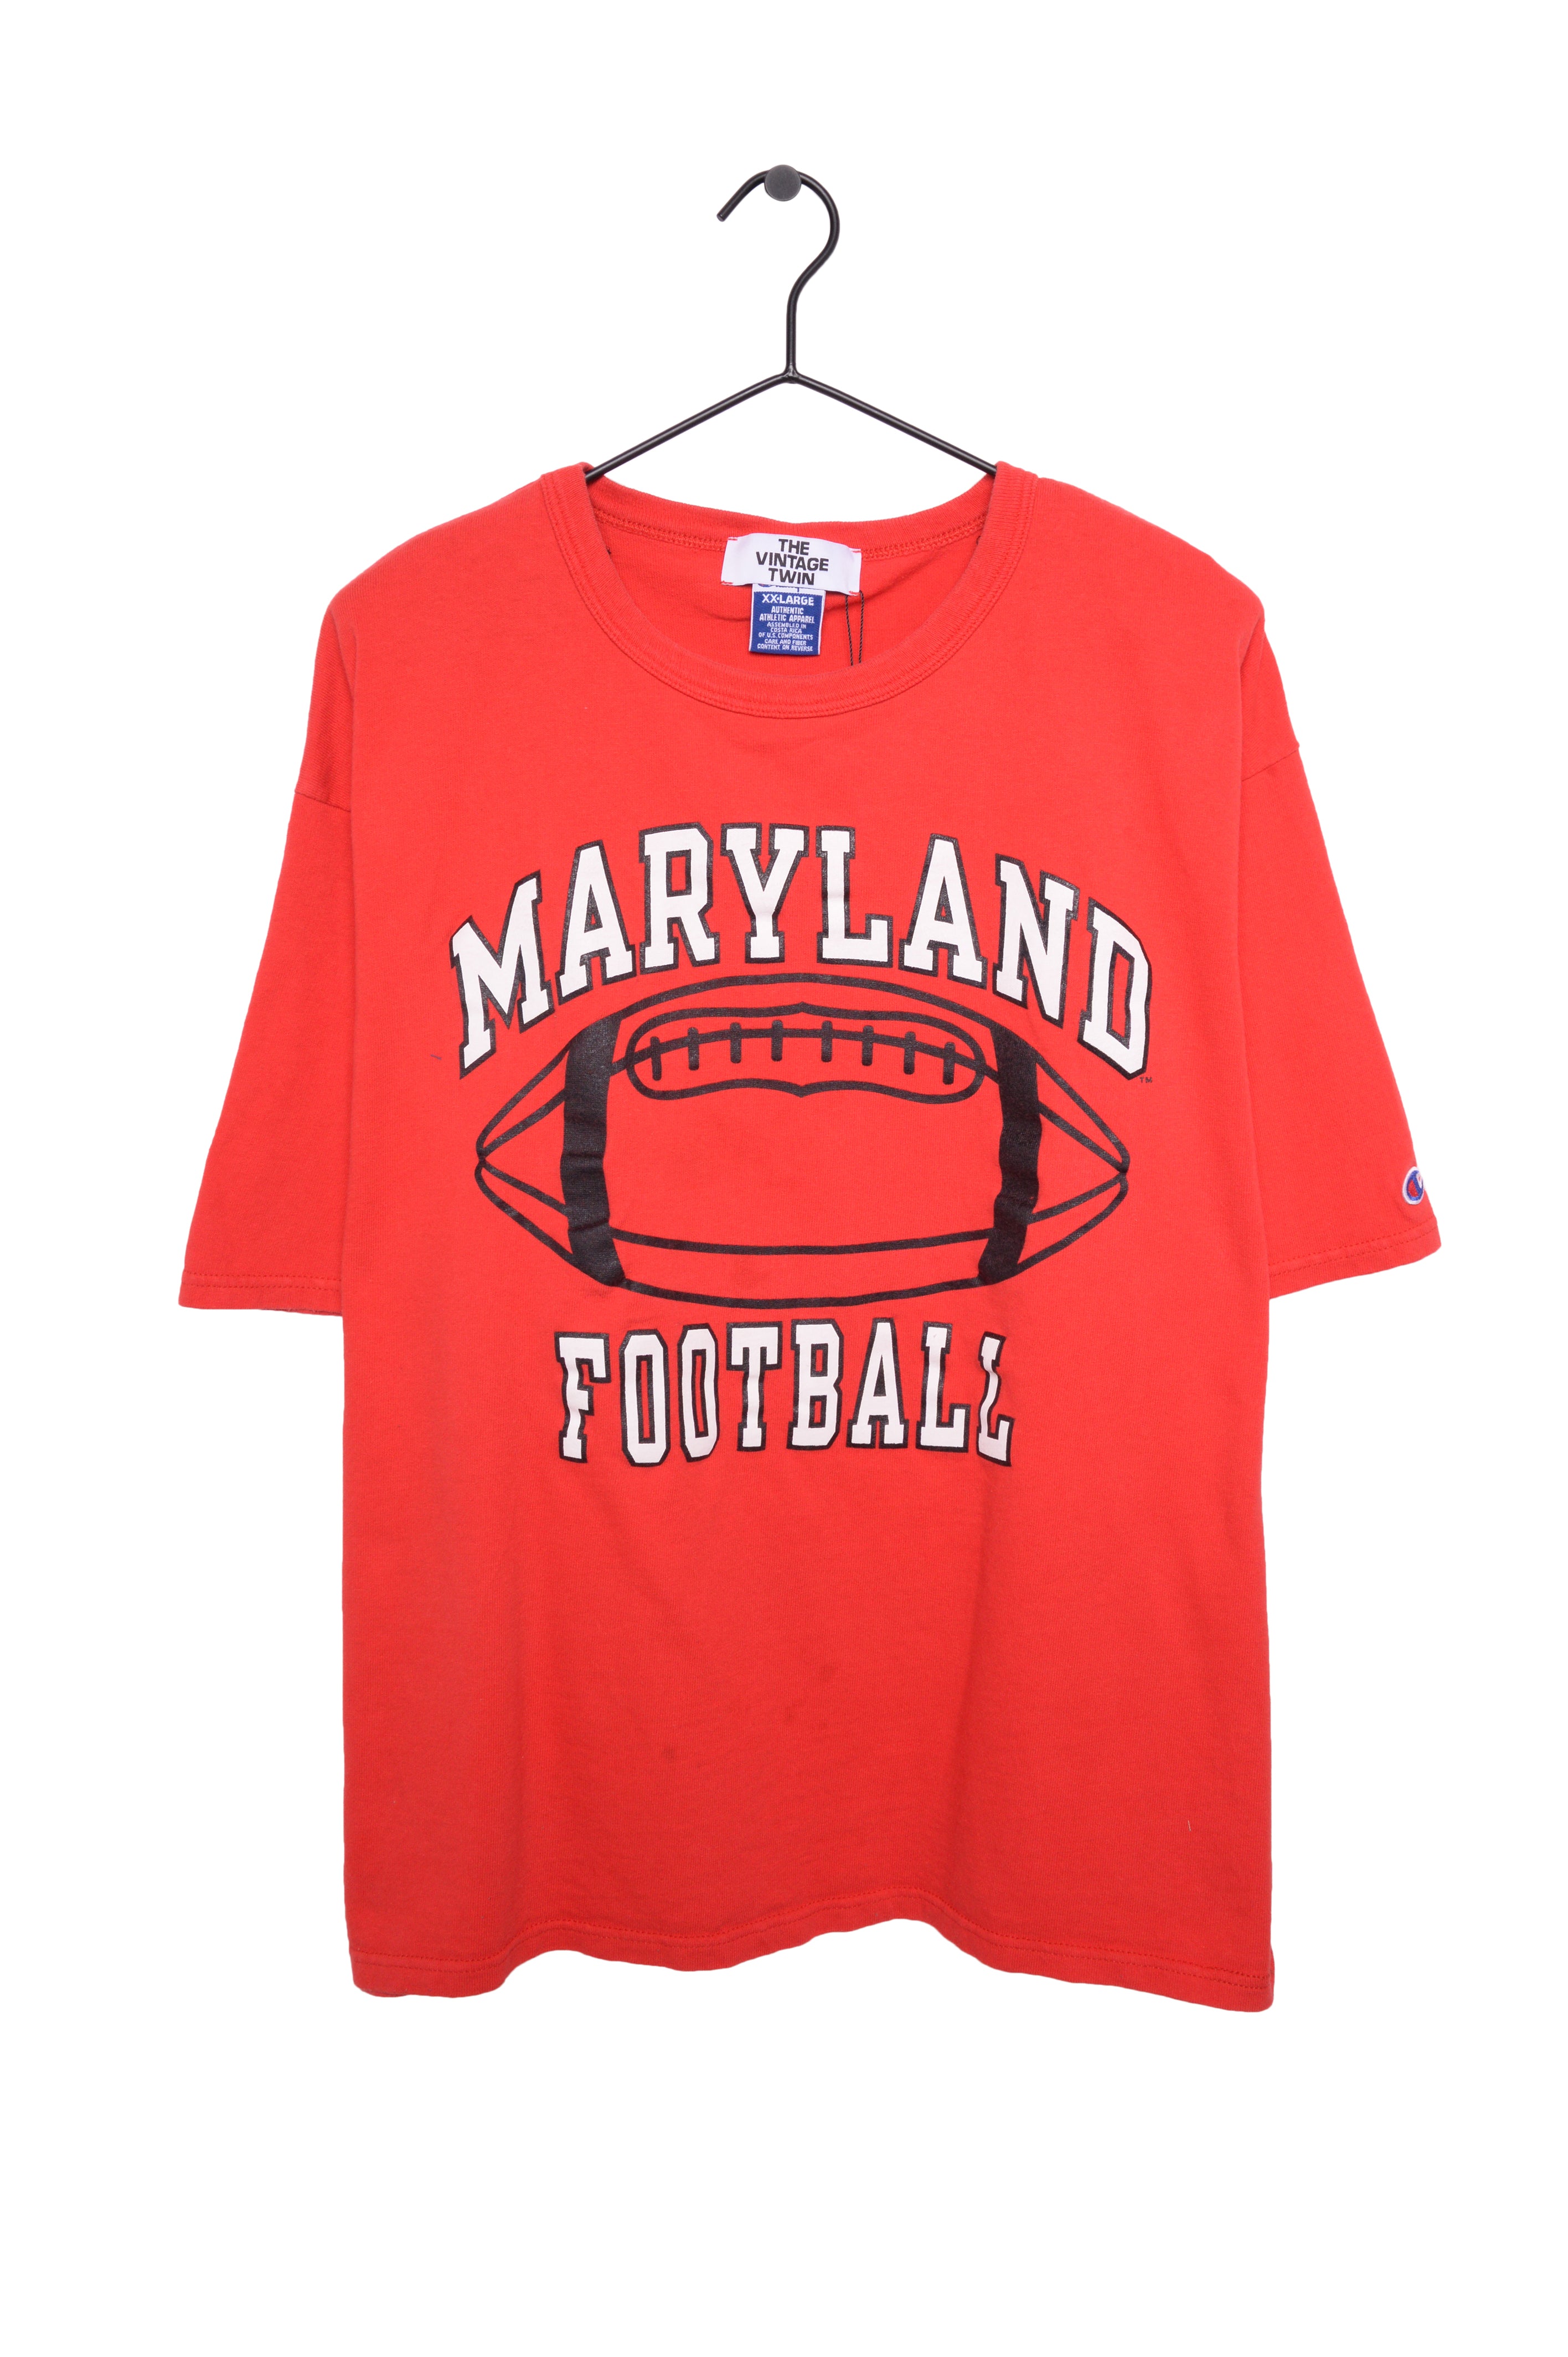 Champion Maryland Football Tee Free Shipping - The Vintage Twin